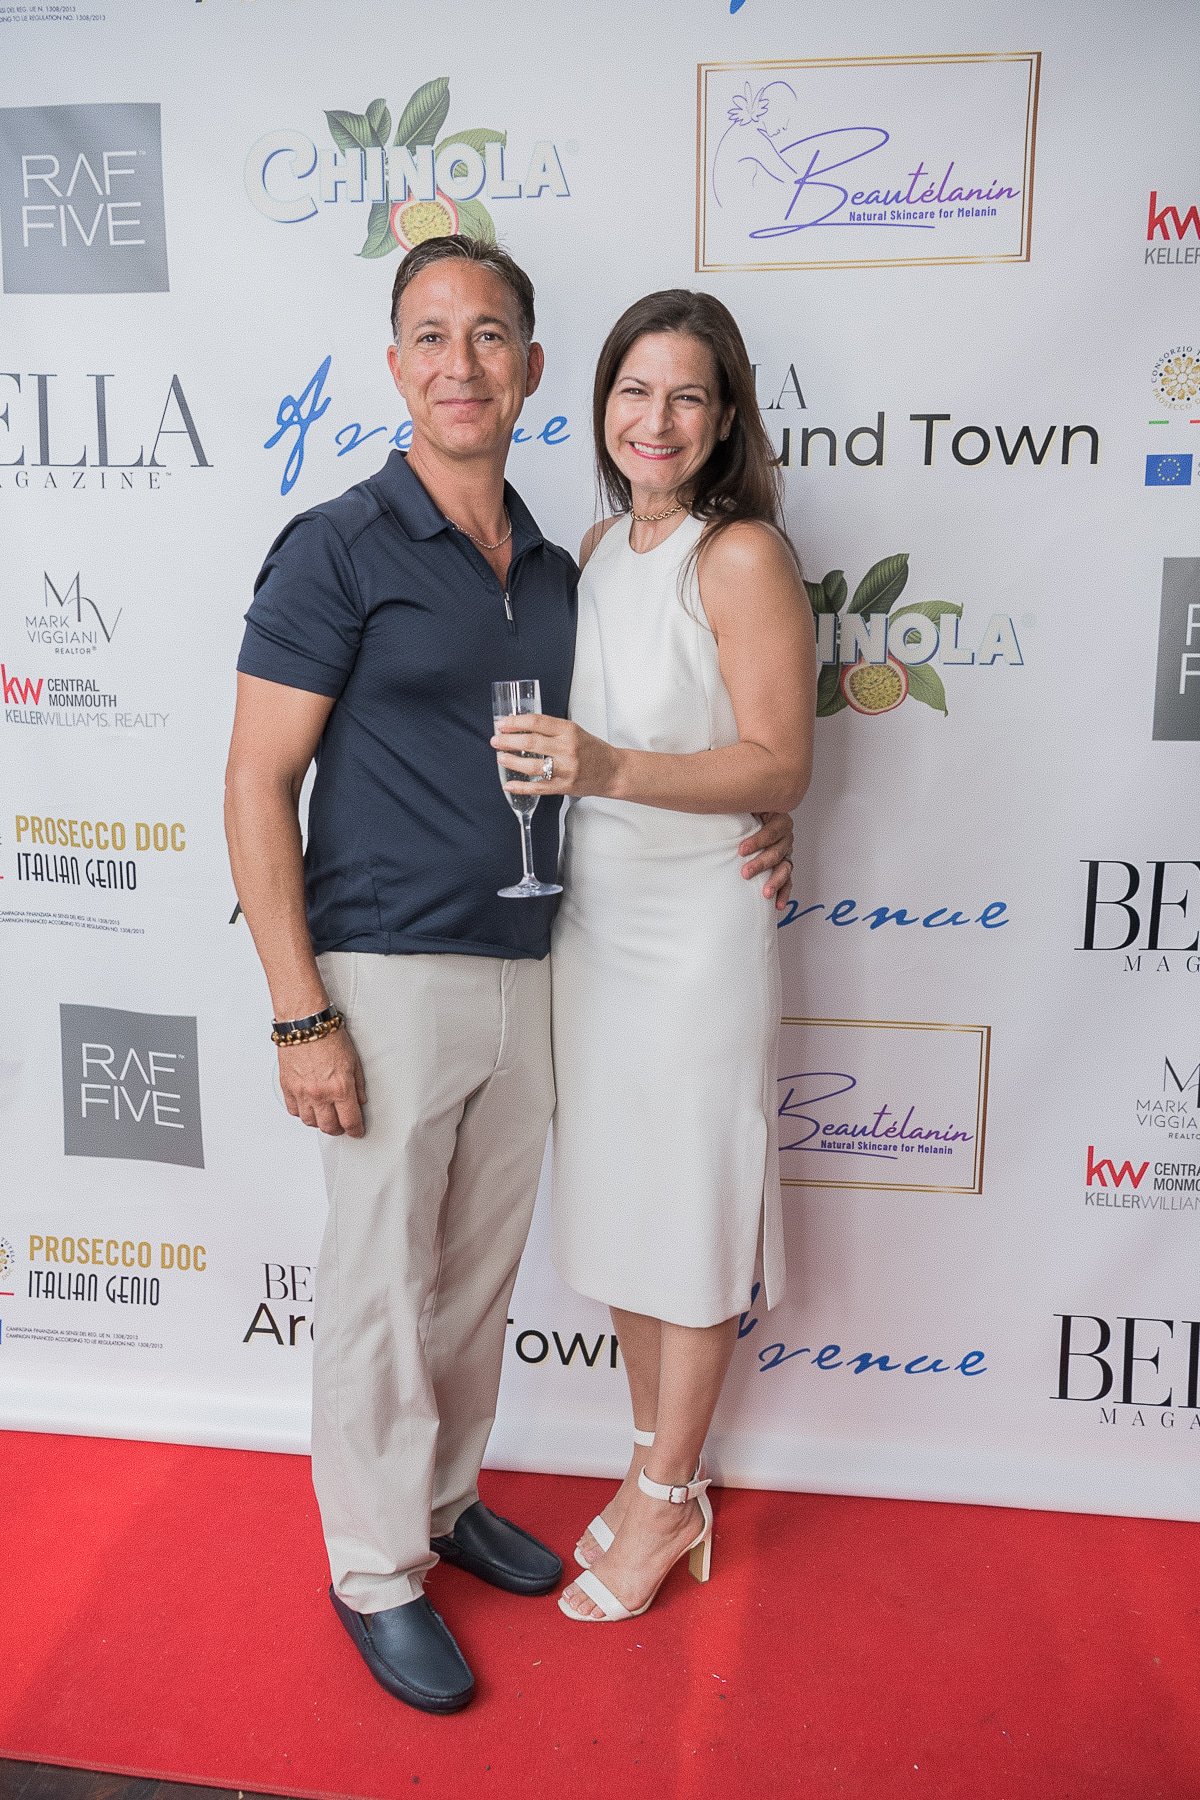 BELLA-MAGAZINE-Summer-Issue-Cover-Party-Avenue-Long-Branch-110.jpg